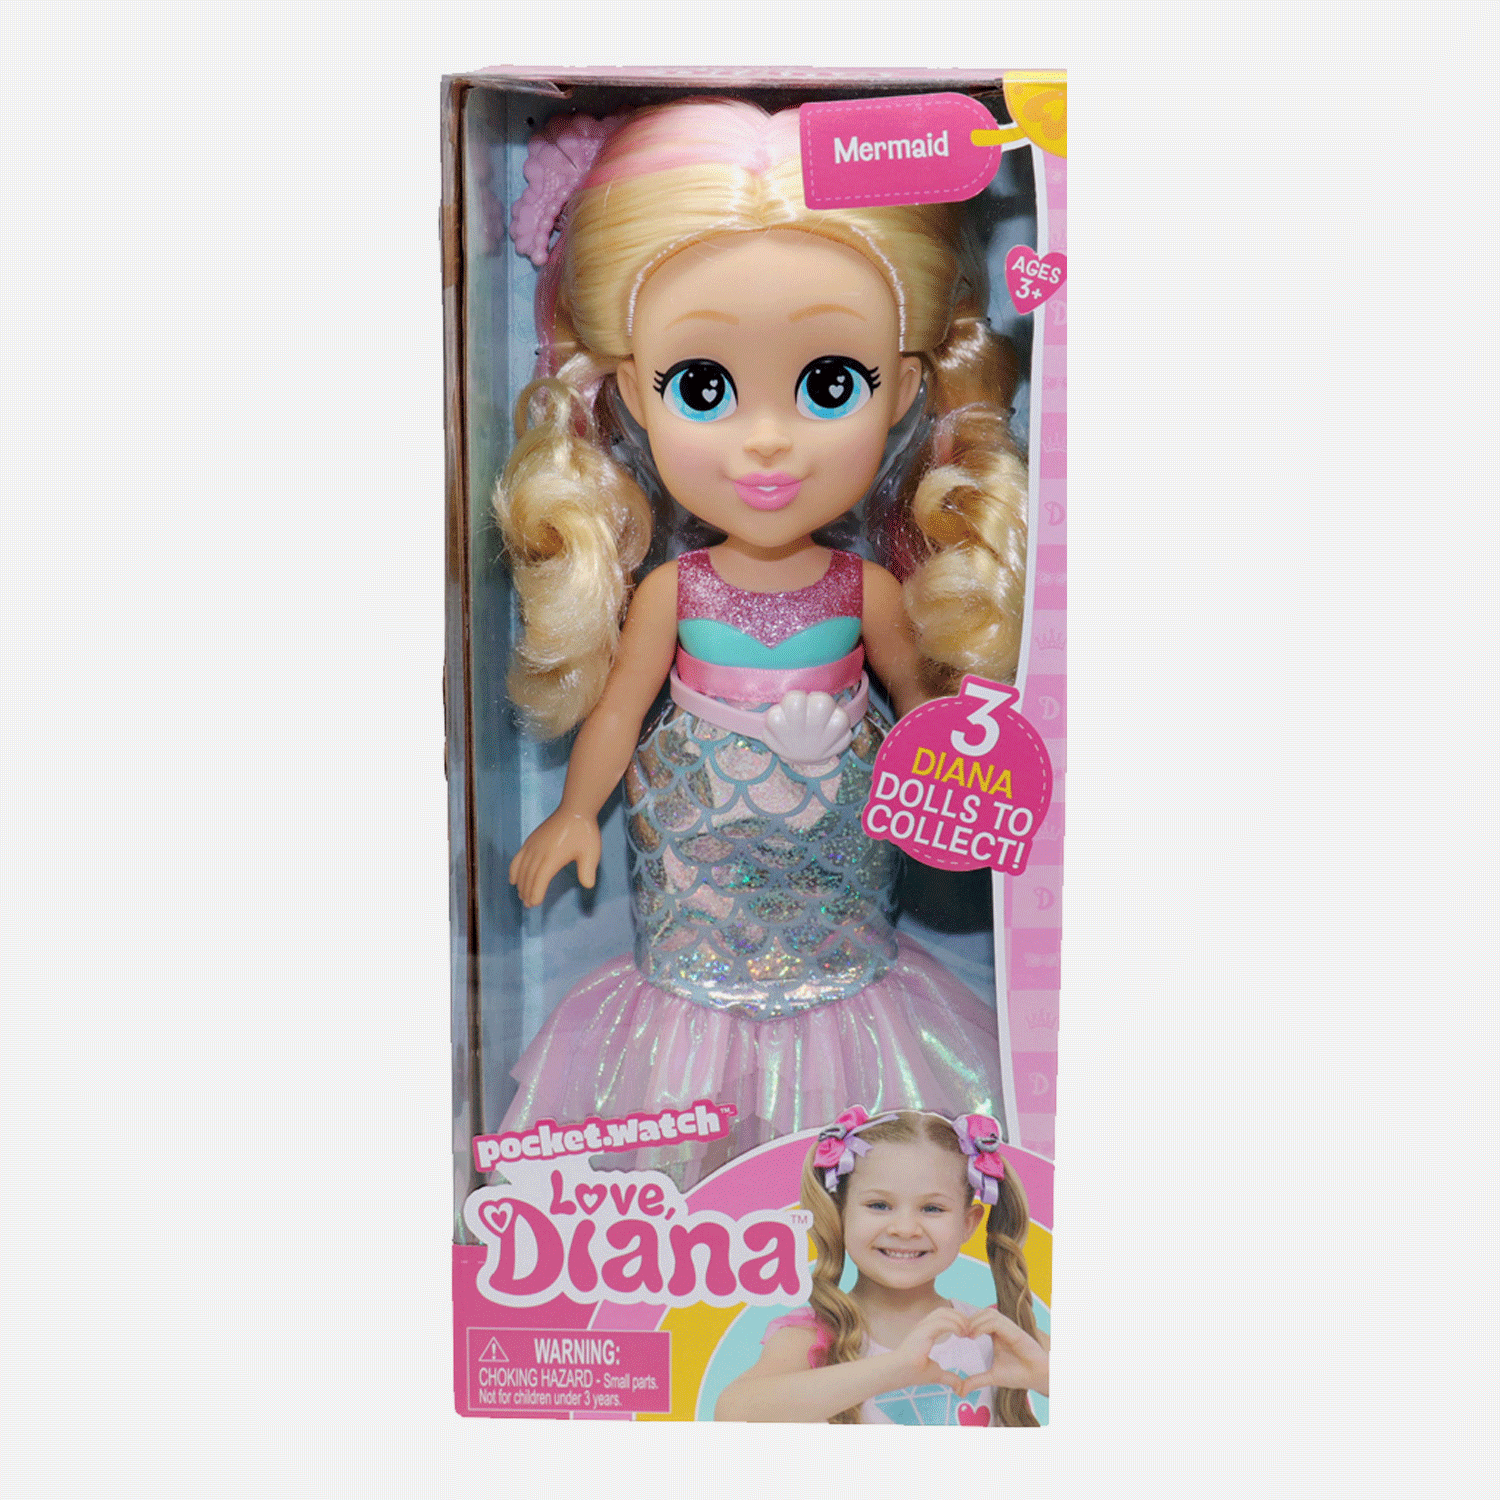 Shop for Love, Diana Mermaid Doll Online | The SM Store